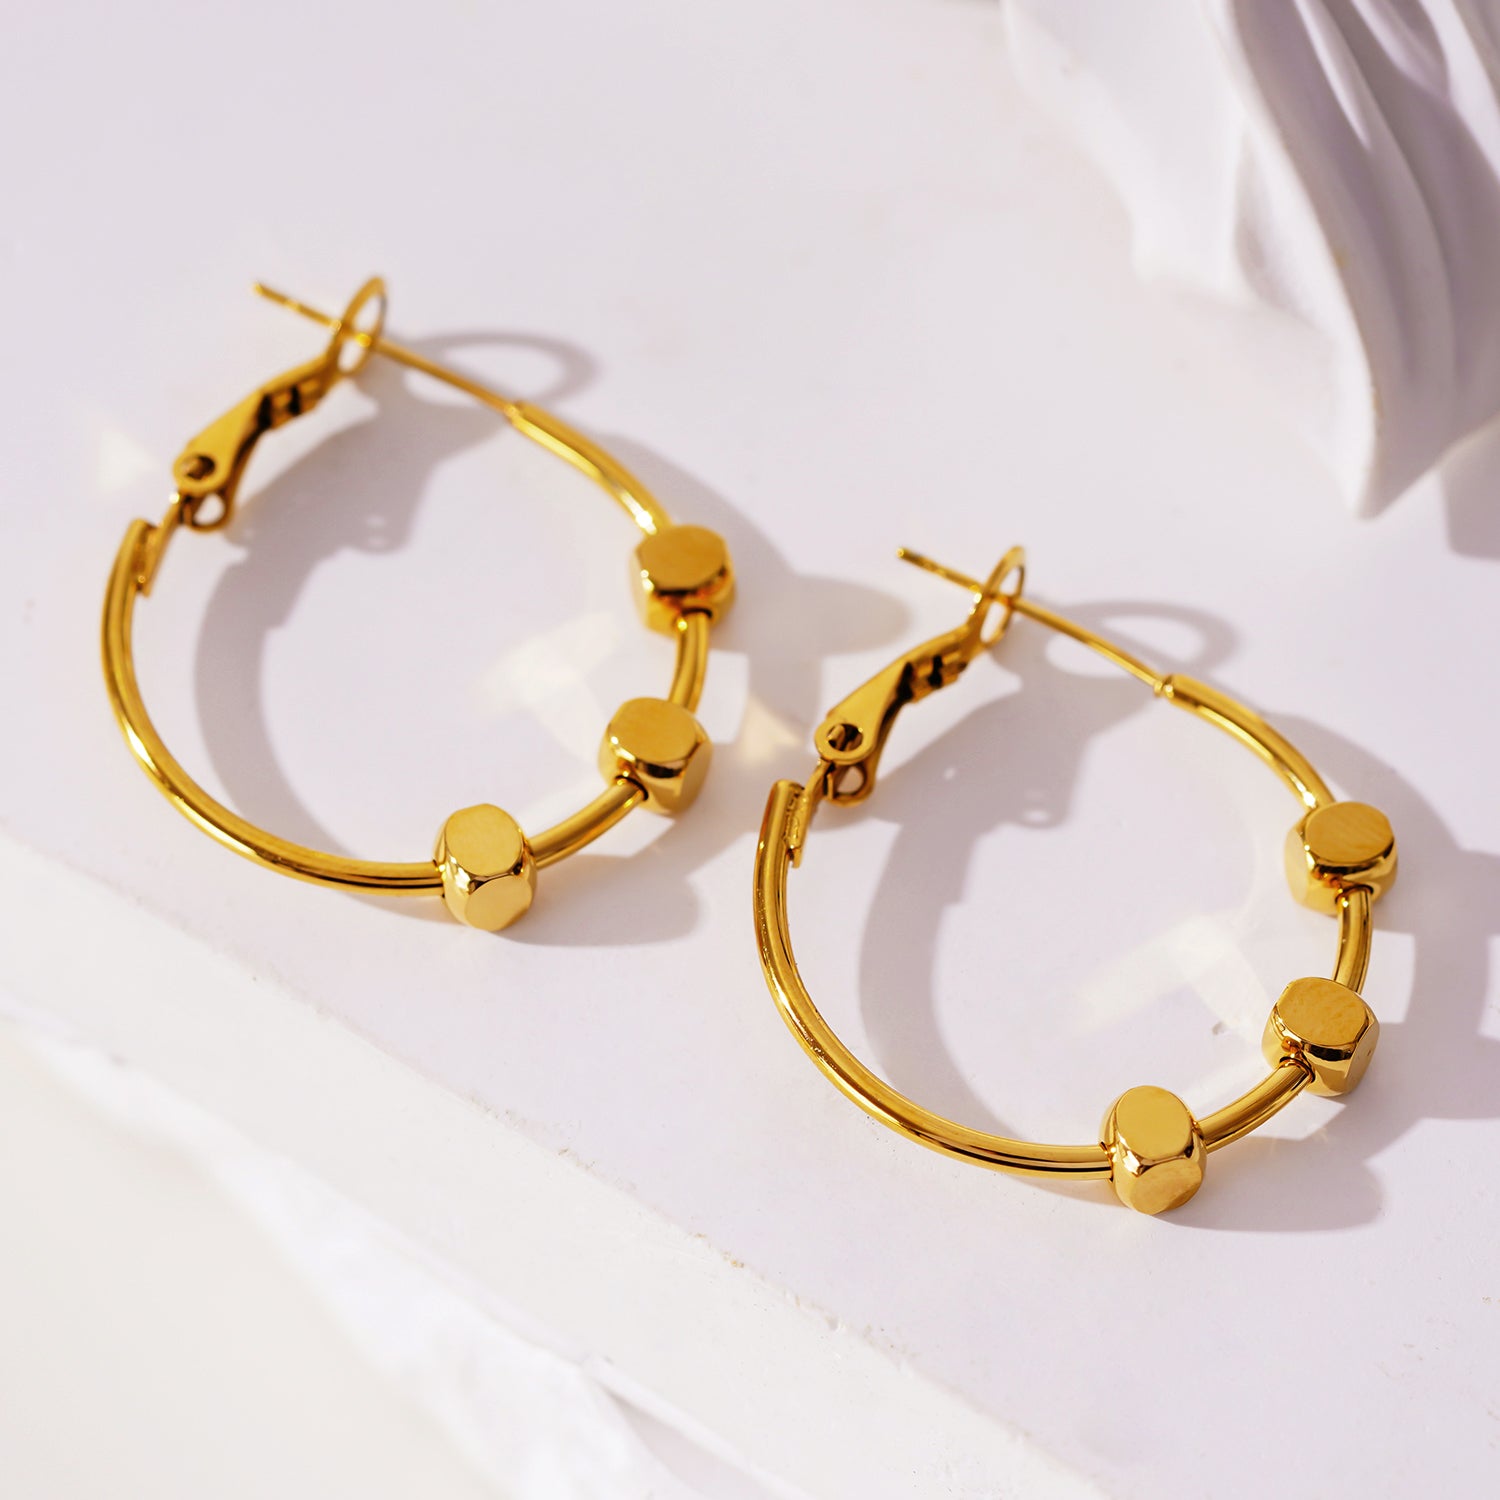 Style MASUYO 1079: Avant-Garde Rounded Hoop Earrings Anchoring a Trio of Square Beads.